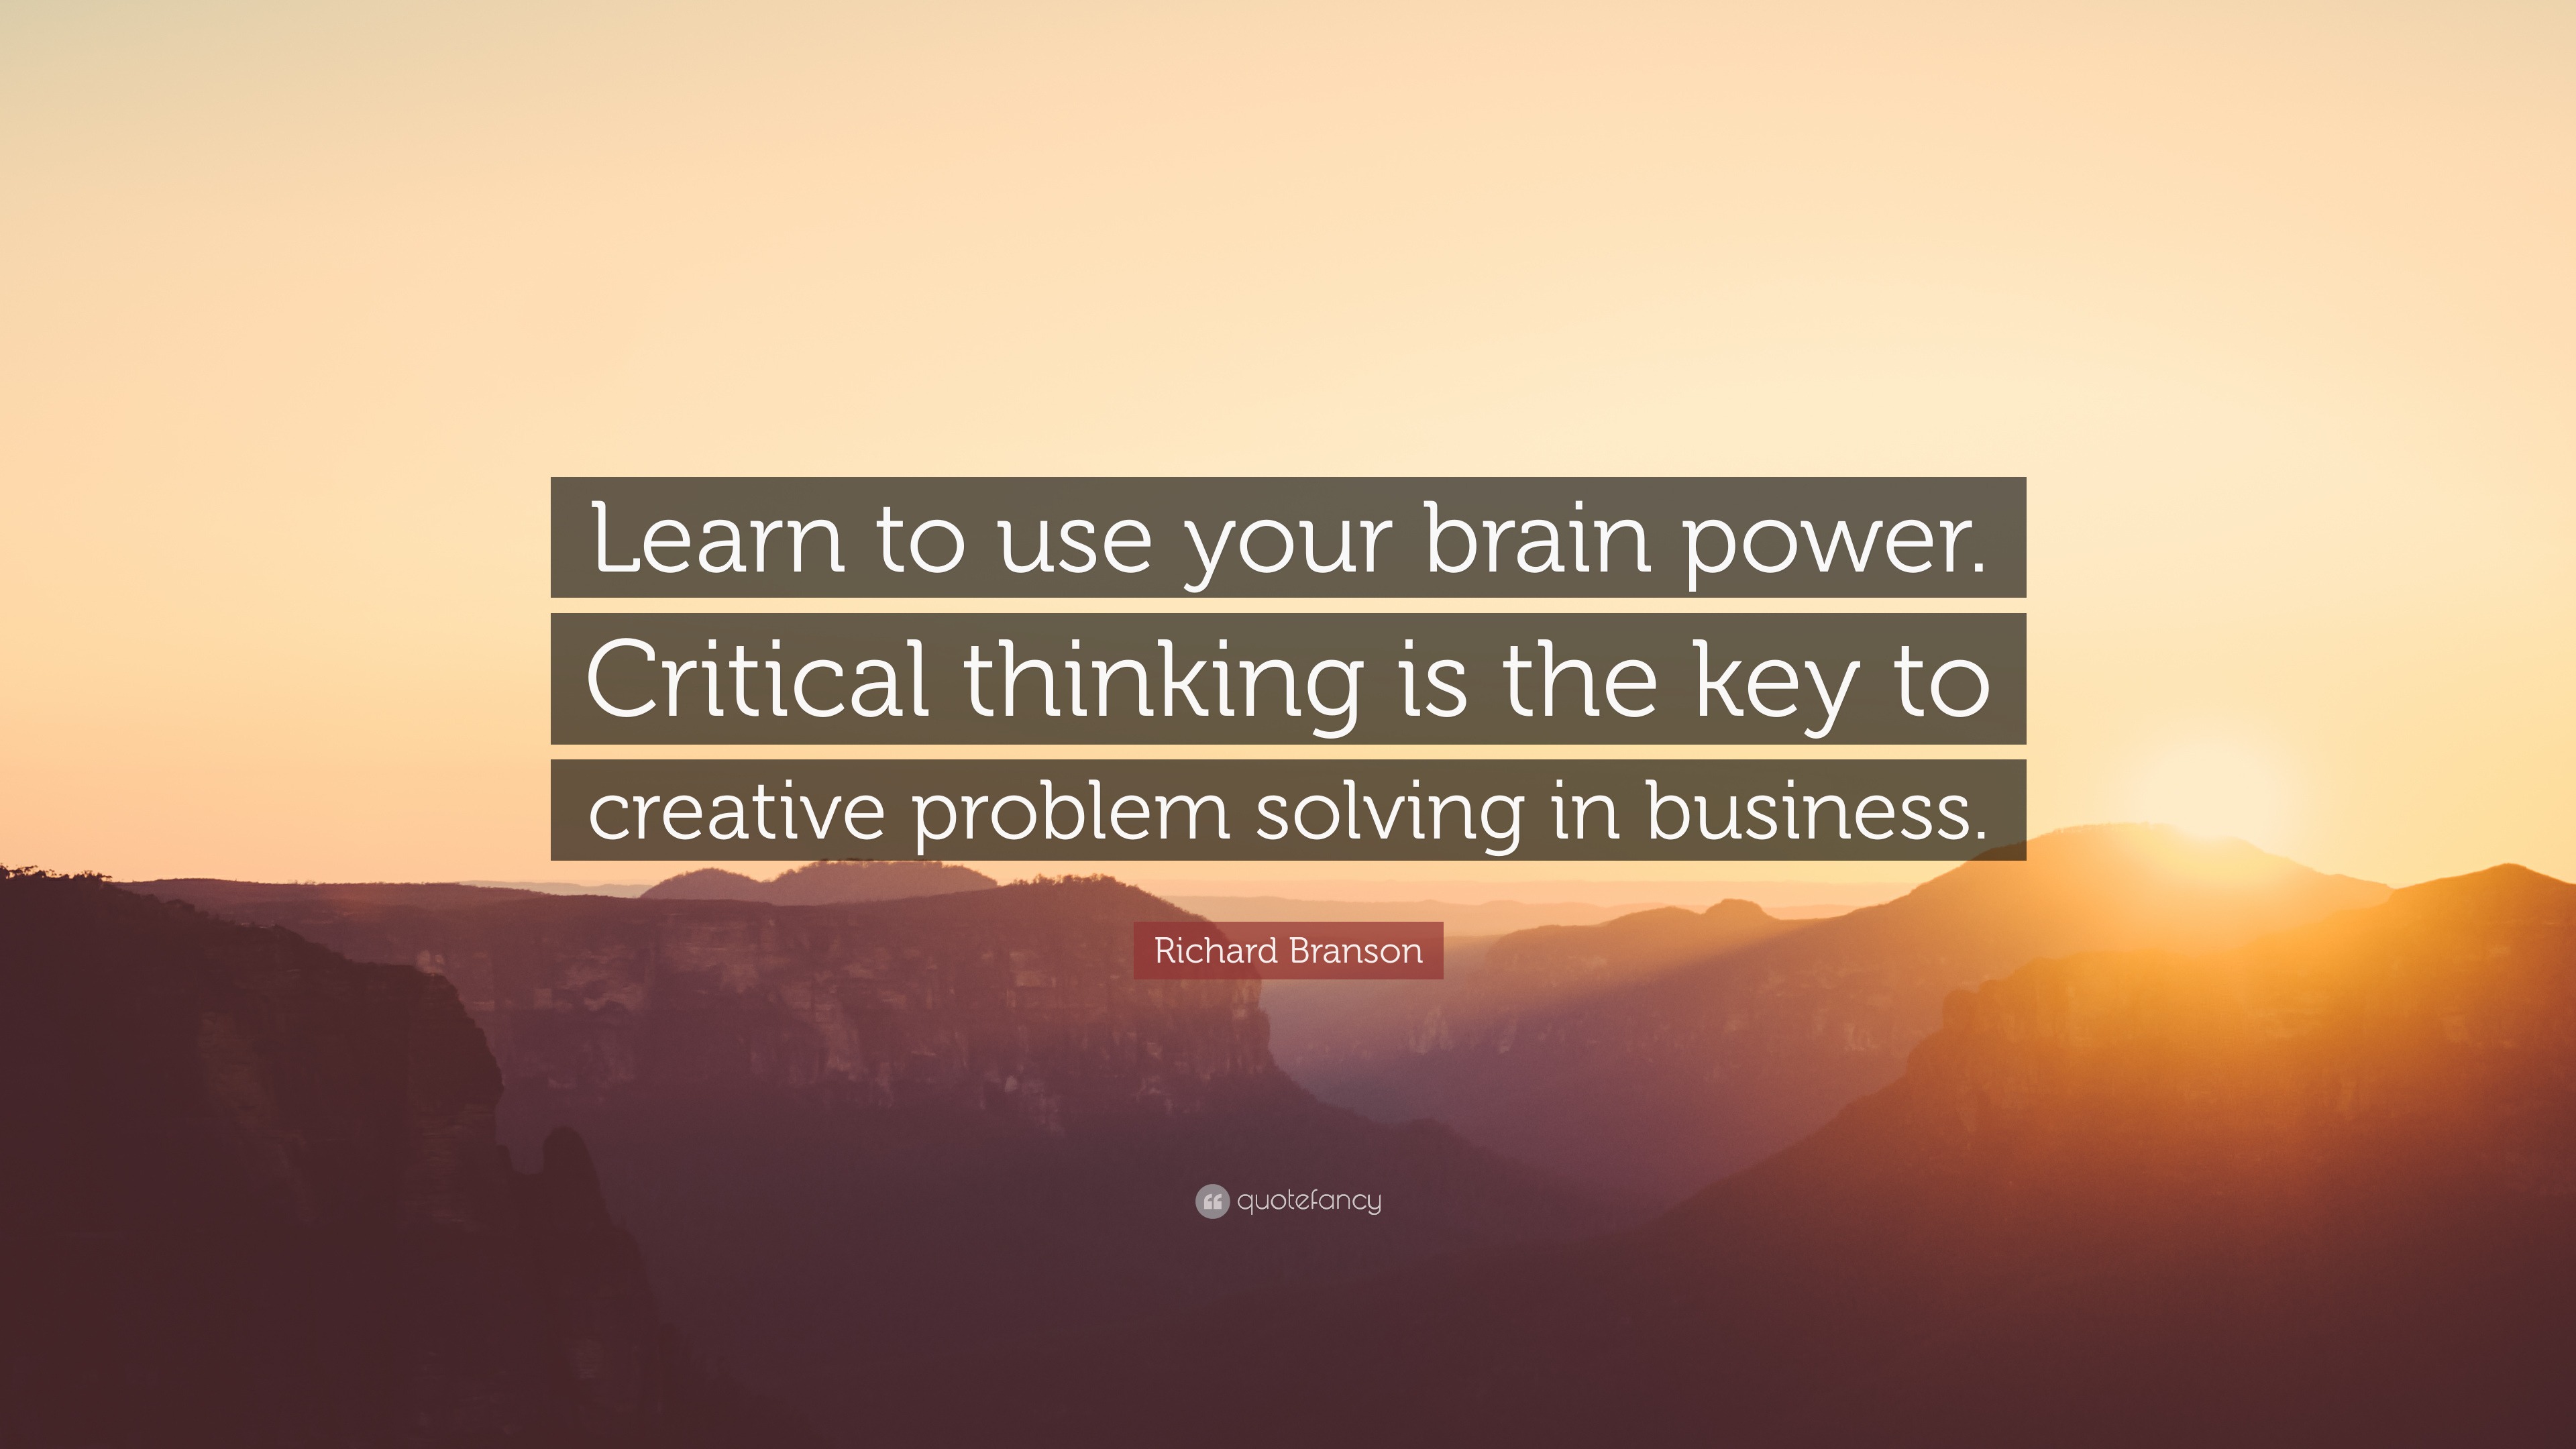 citation for power of critical thinking